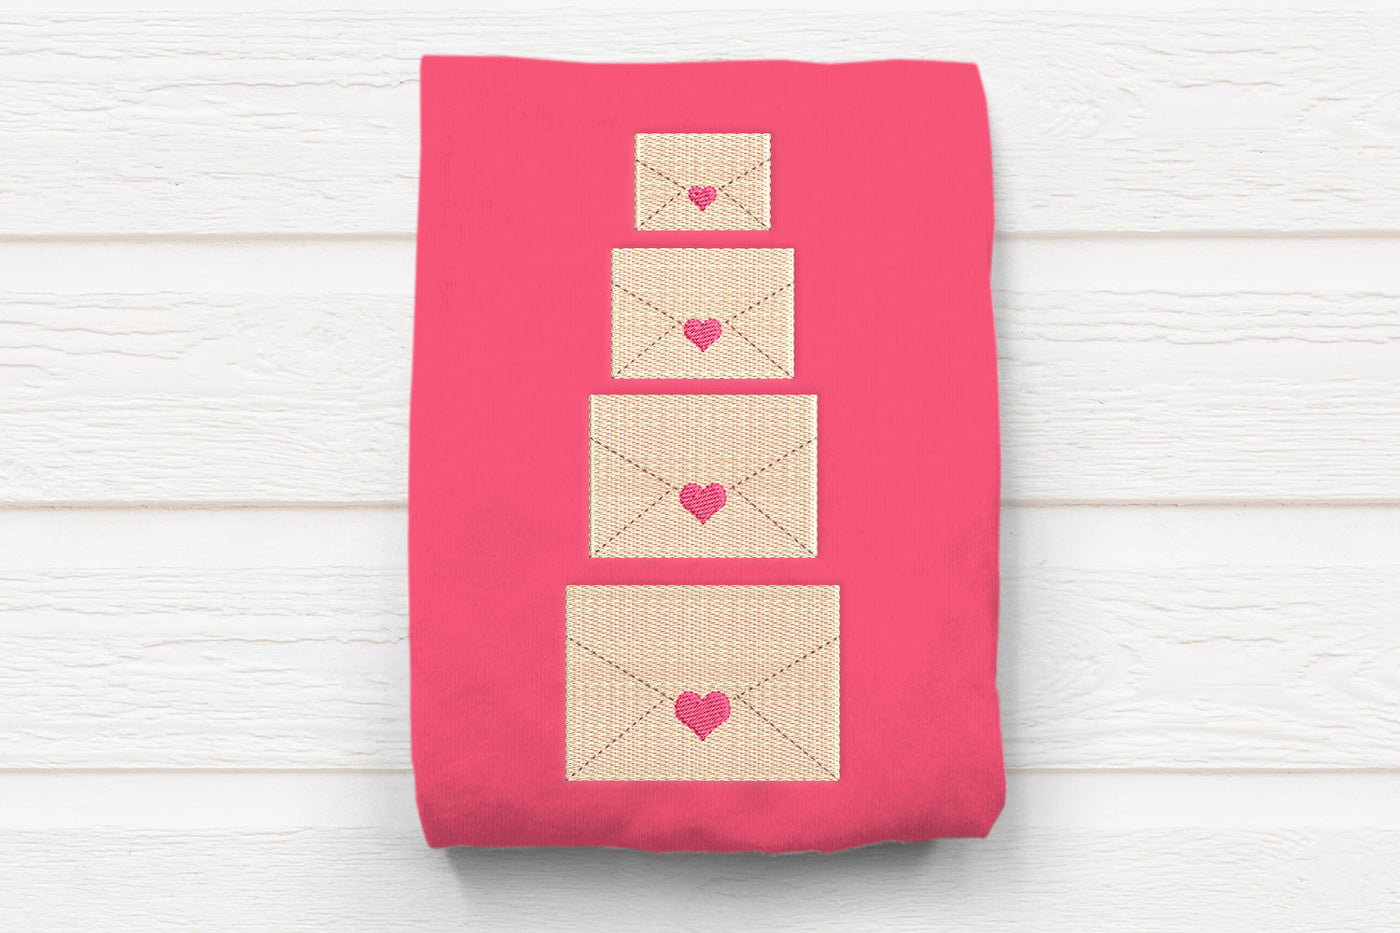 Mini Valentine's Day envelope embroidery design, sealed with a heart